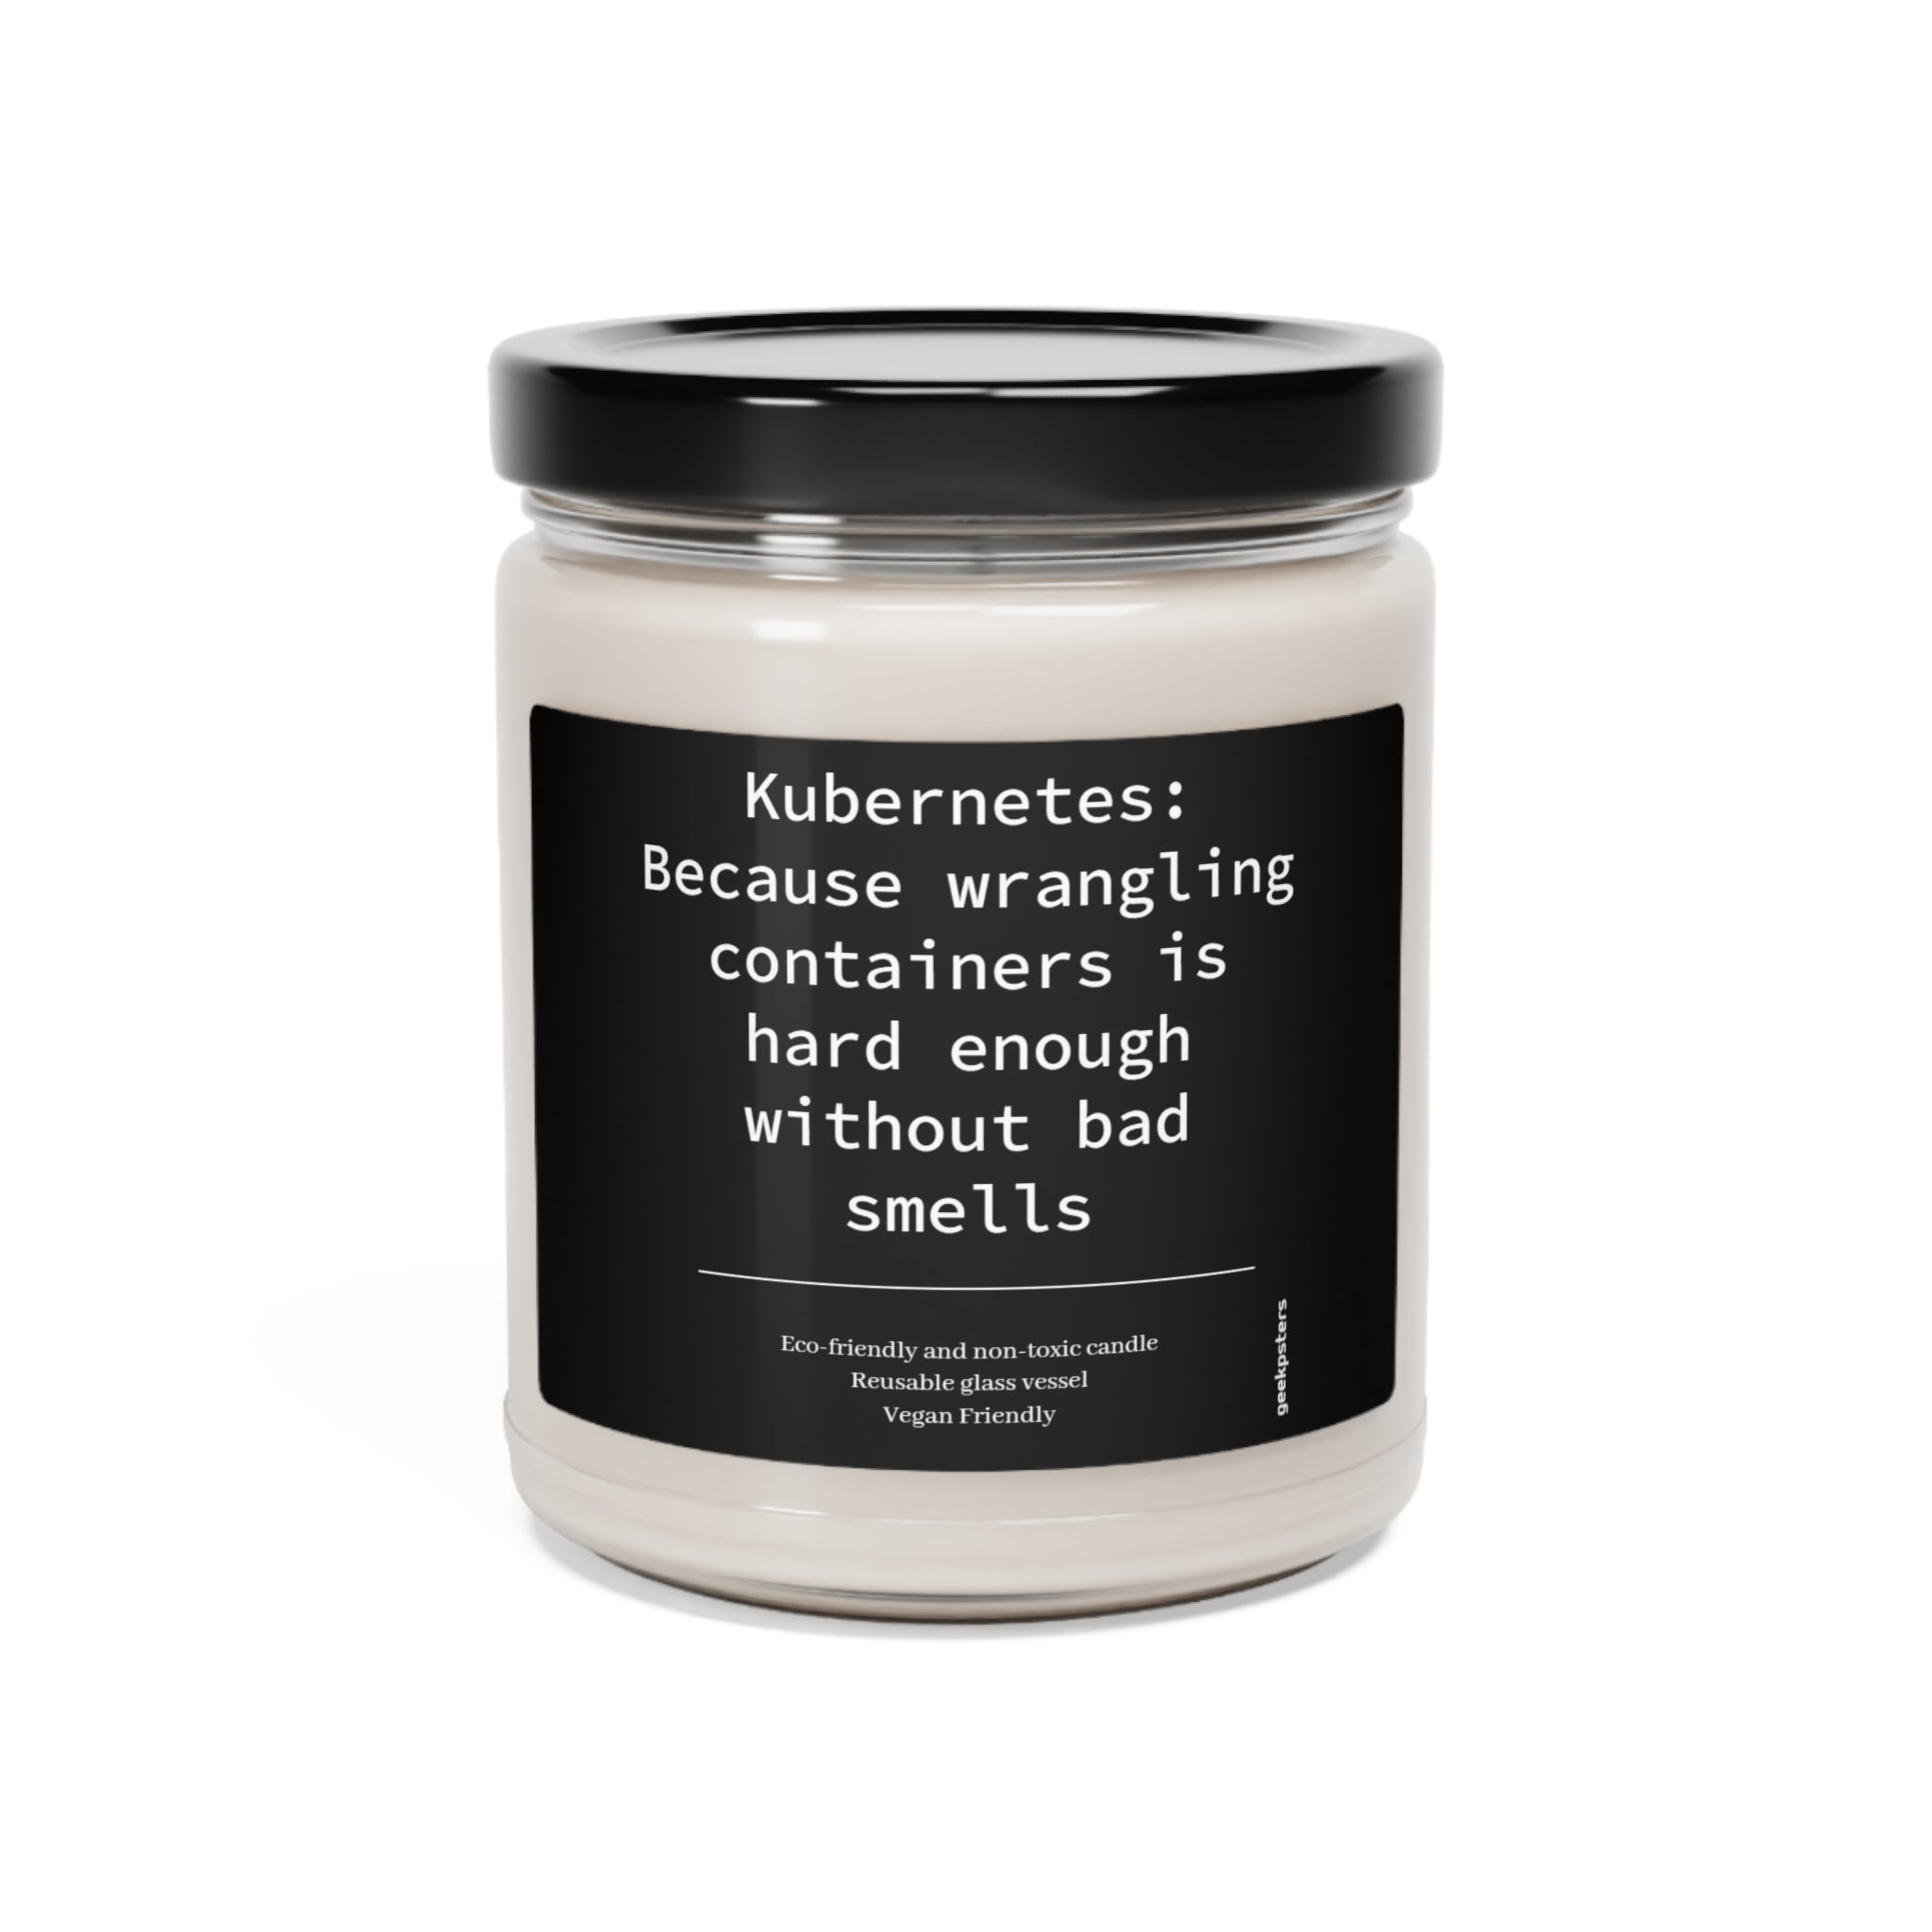 A Container Candle - Scented Soy Candle, 9oz with a label that reads "kubernetes: because wrangling containers is hard enough without bad smells." The label also states the candle is made from natural soy wax, non-toxic.